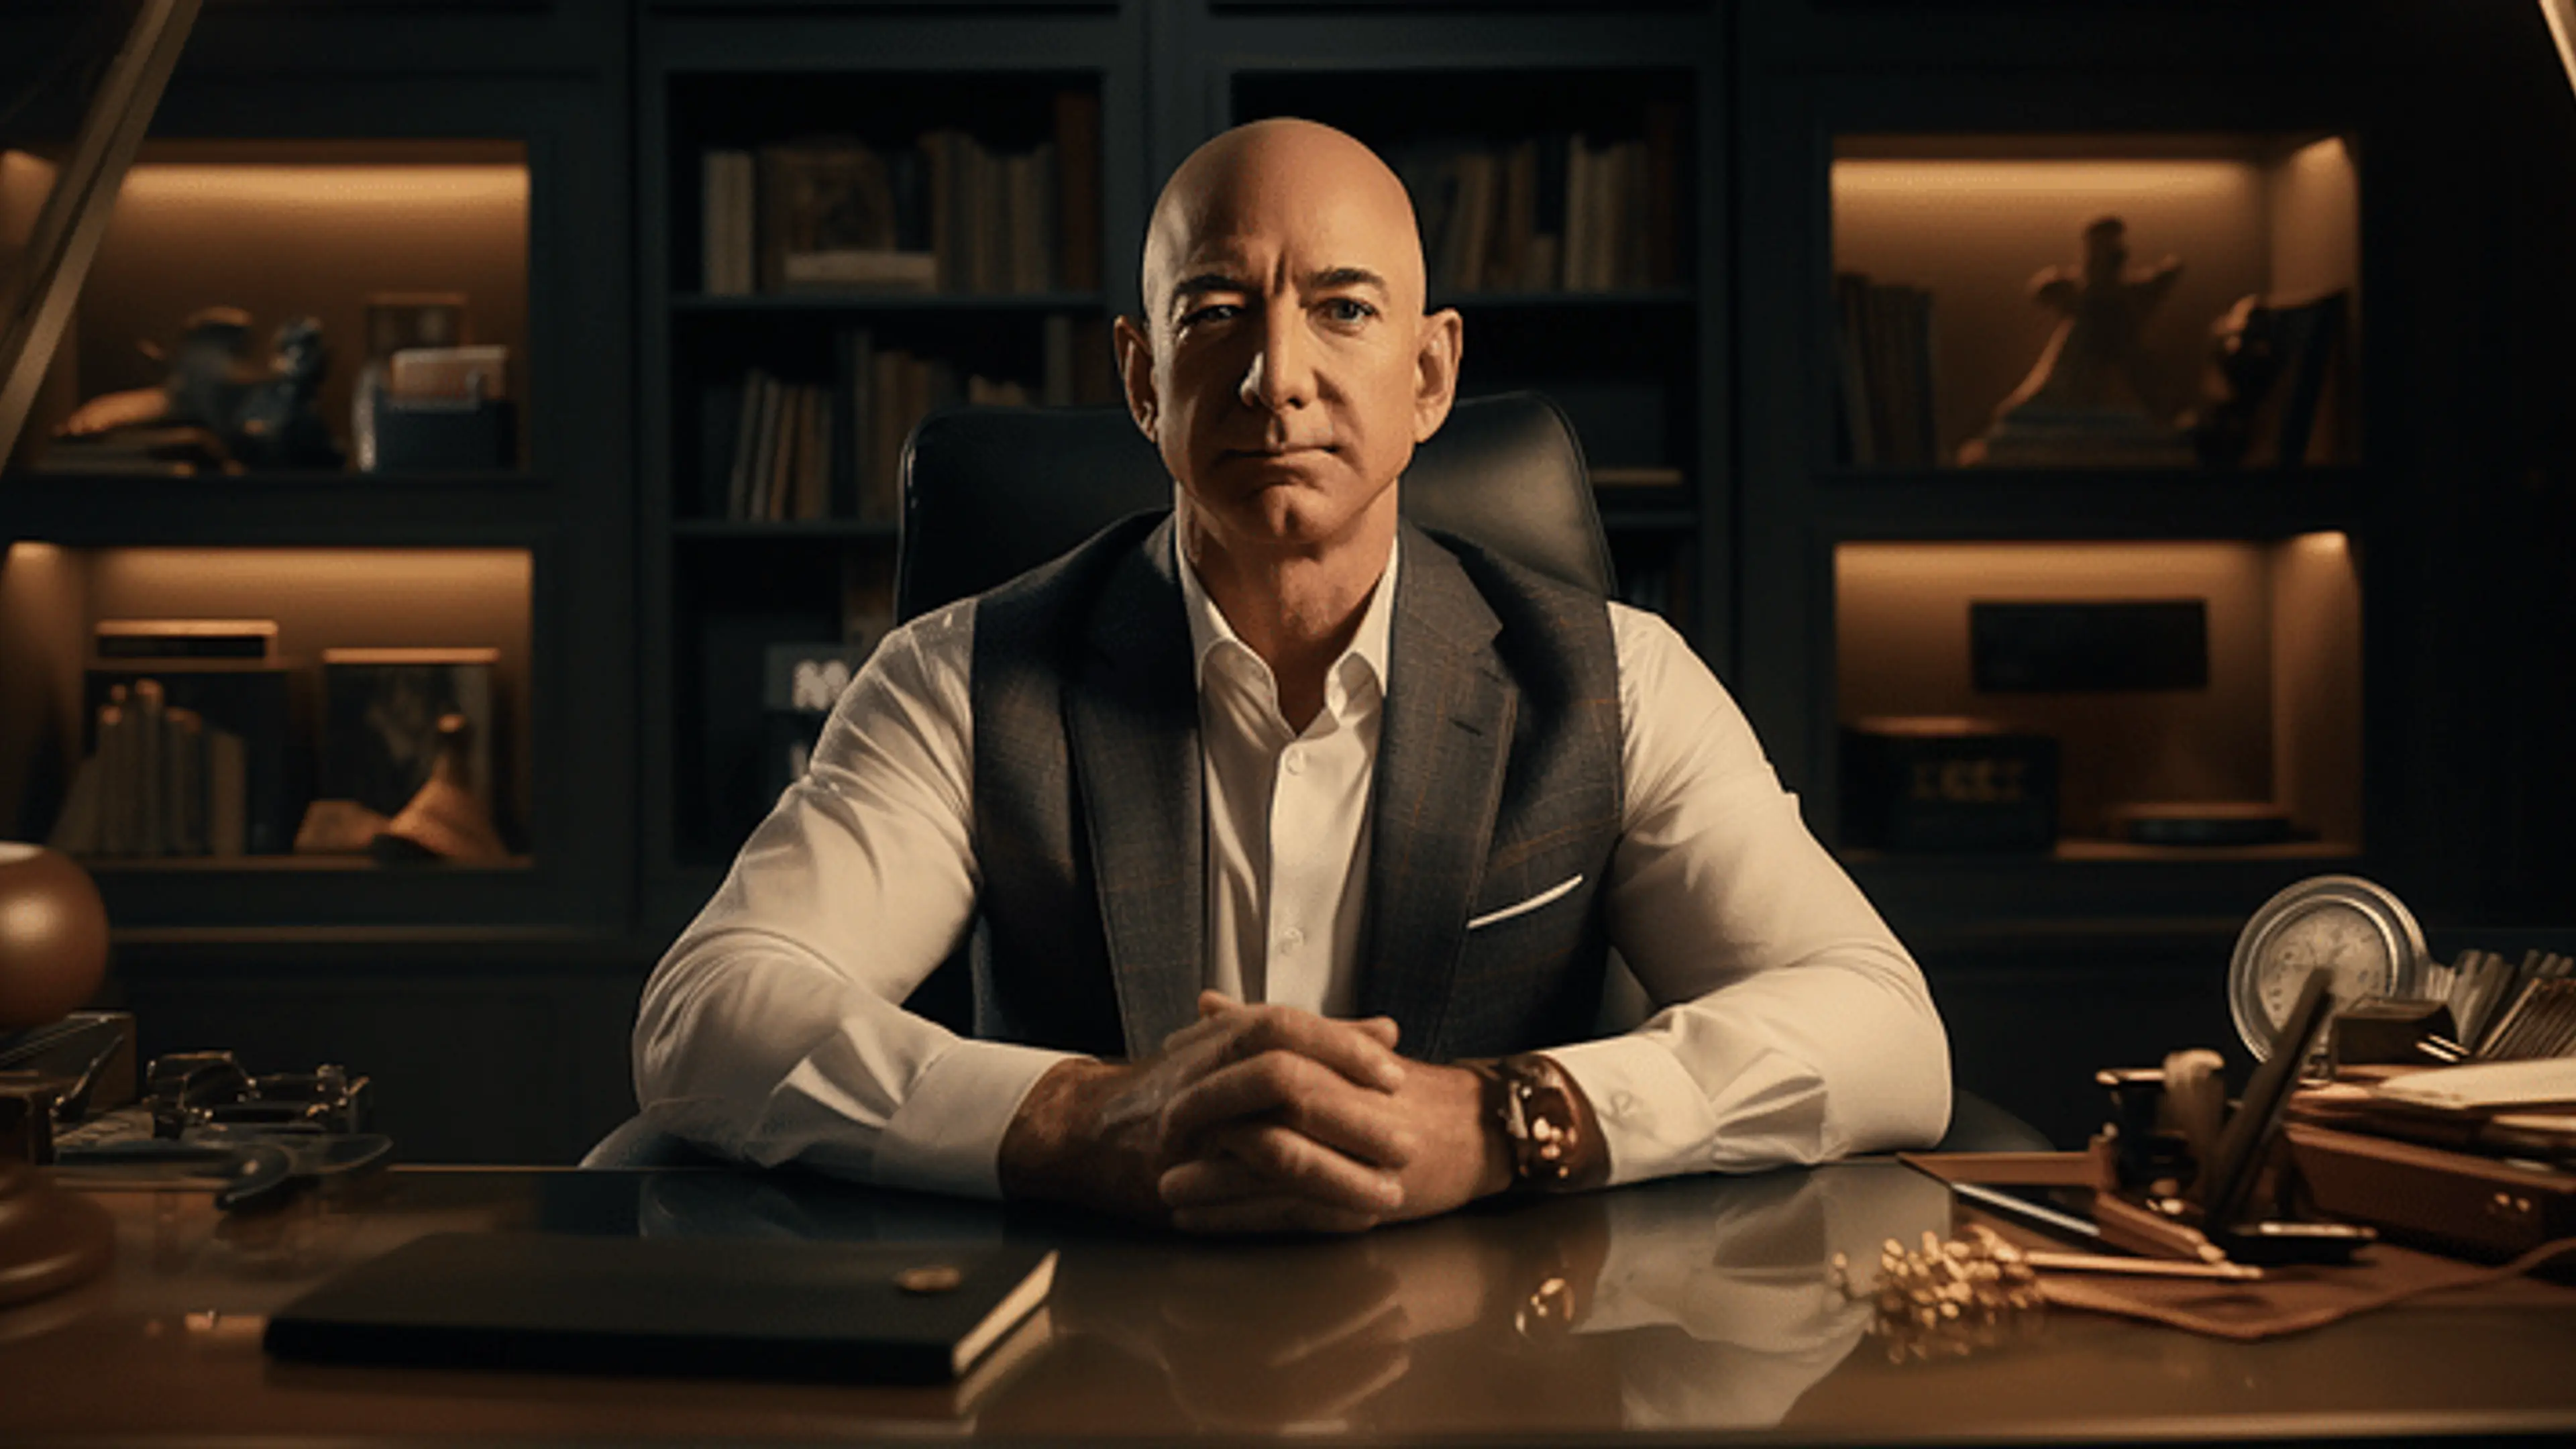 Jeff Bezos' at 60: 9 lesser known facts from his epic journey